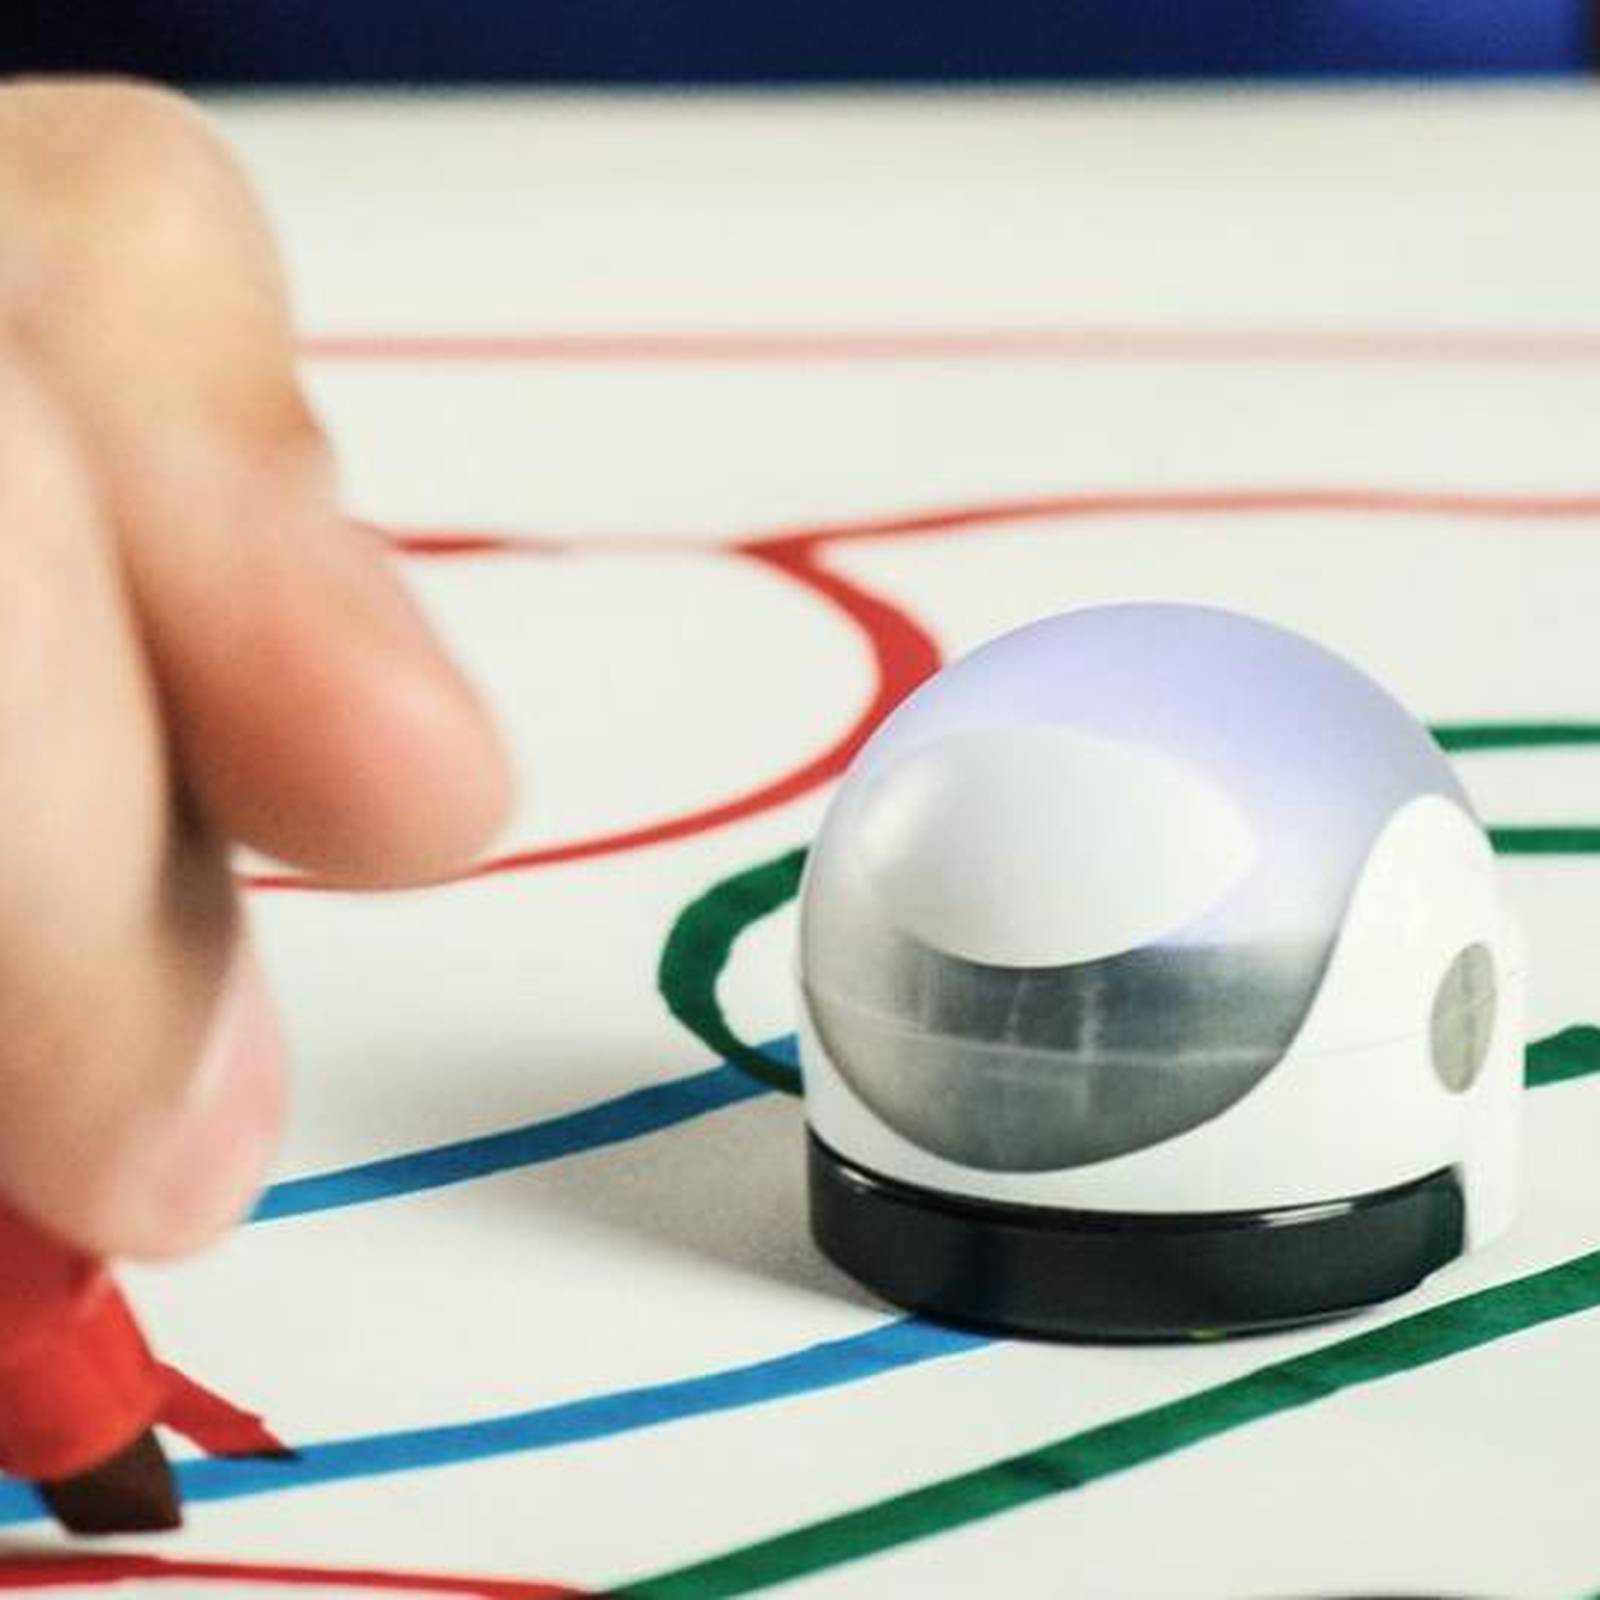 The Ozobots are coming – The Irish Times